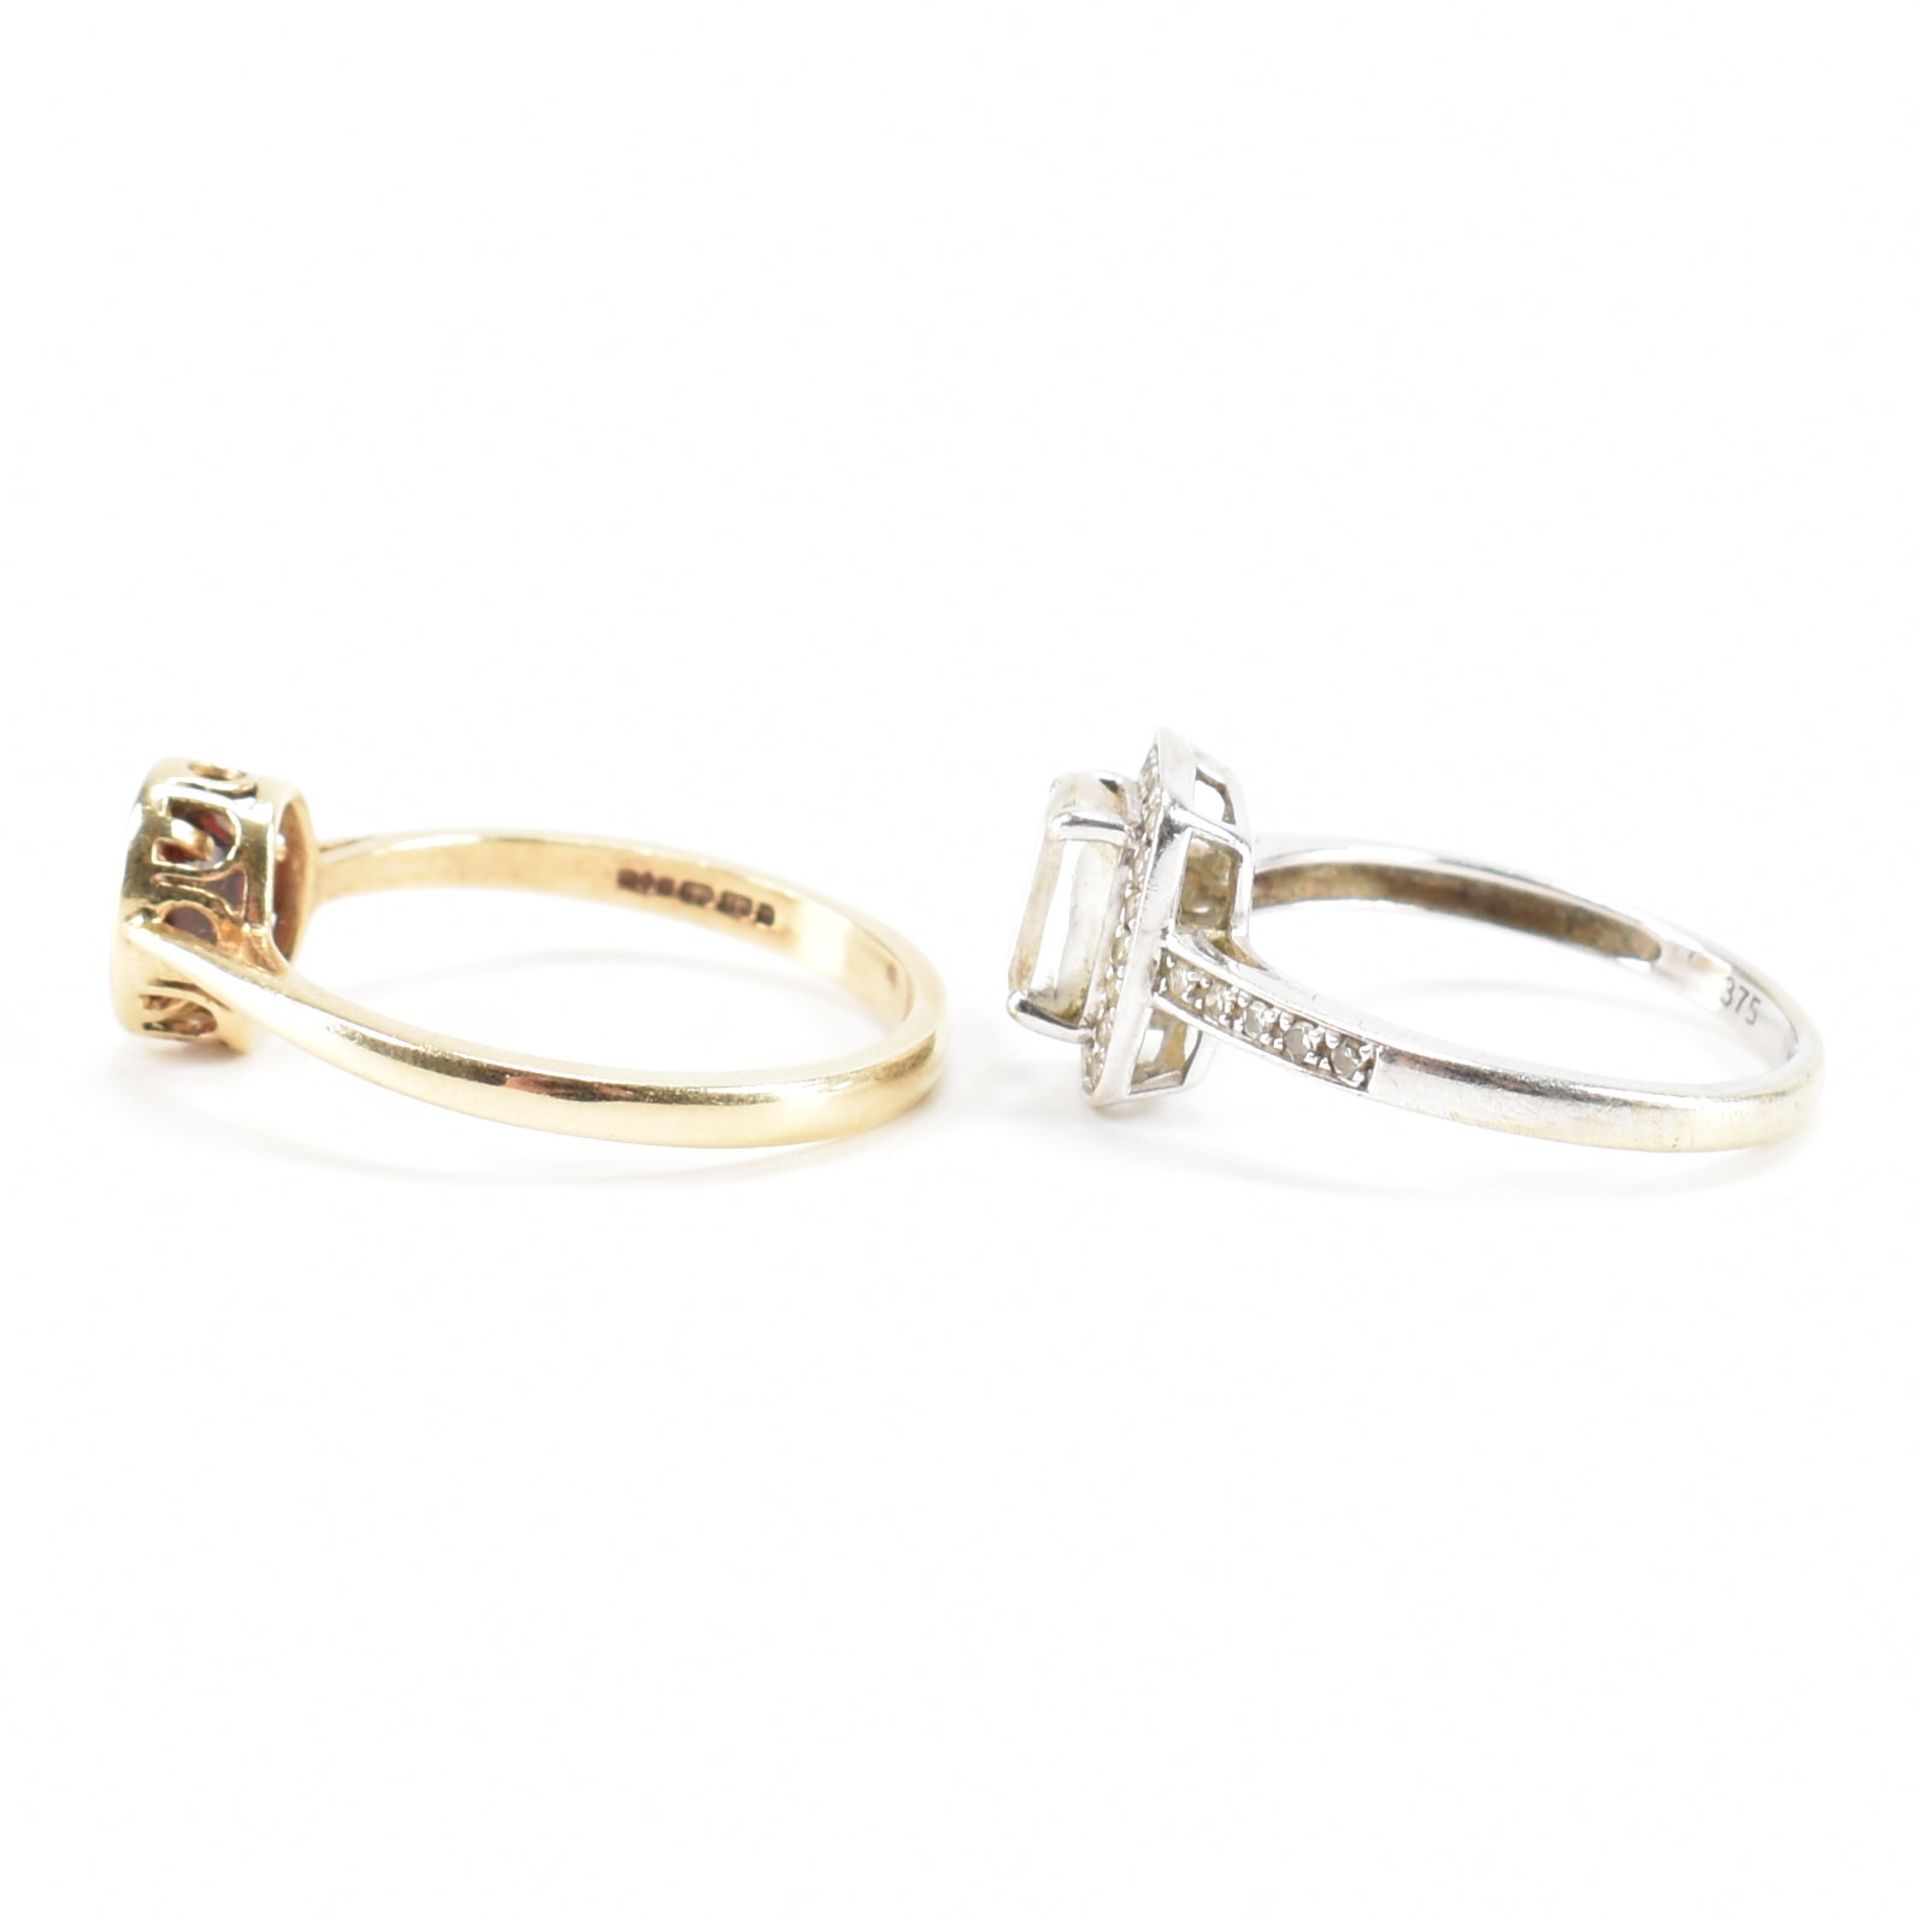 TWO HALLMARKED 9CT GOLD STONE SET RINGS - Image 2 of 8